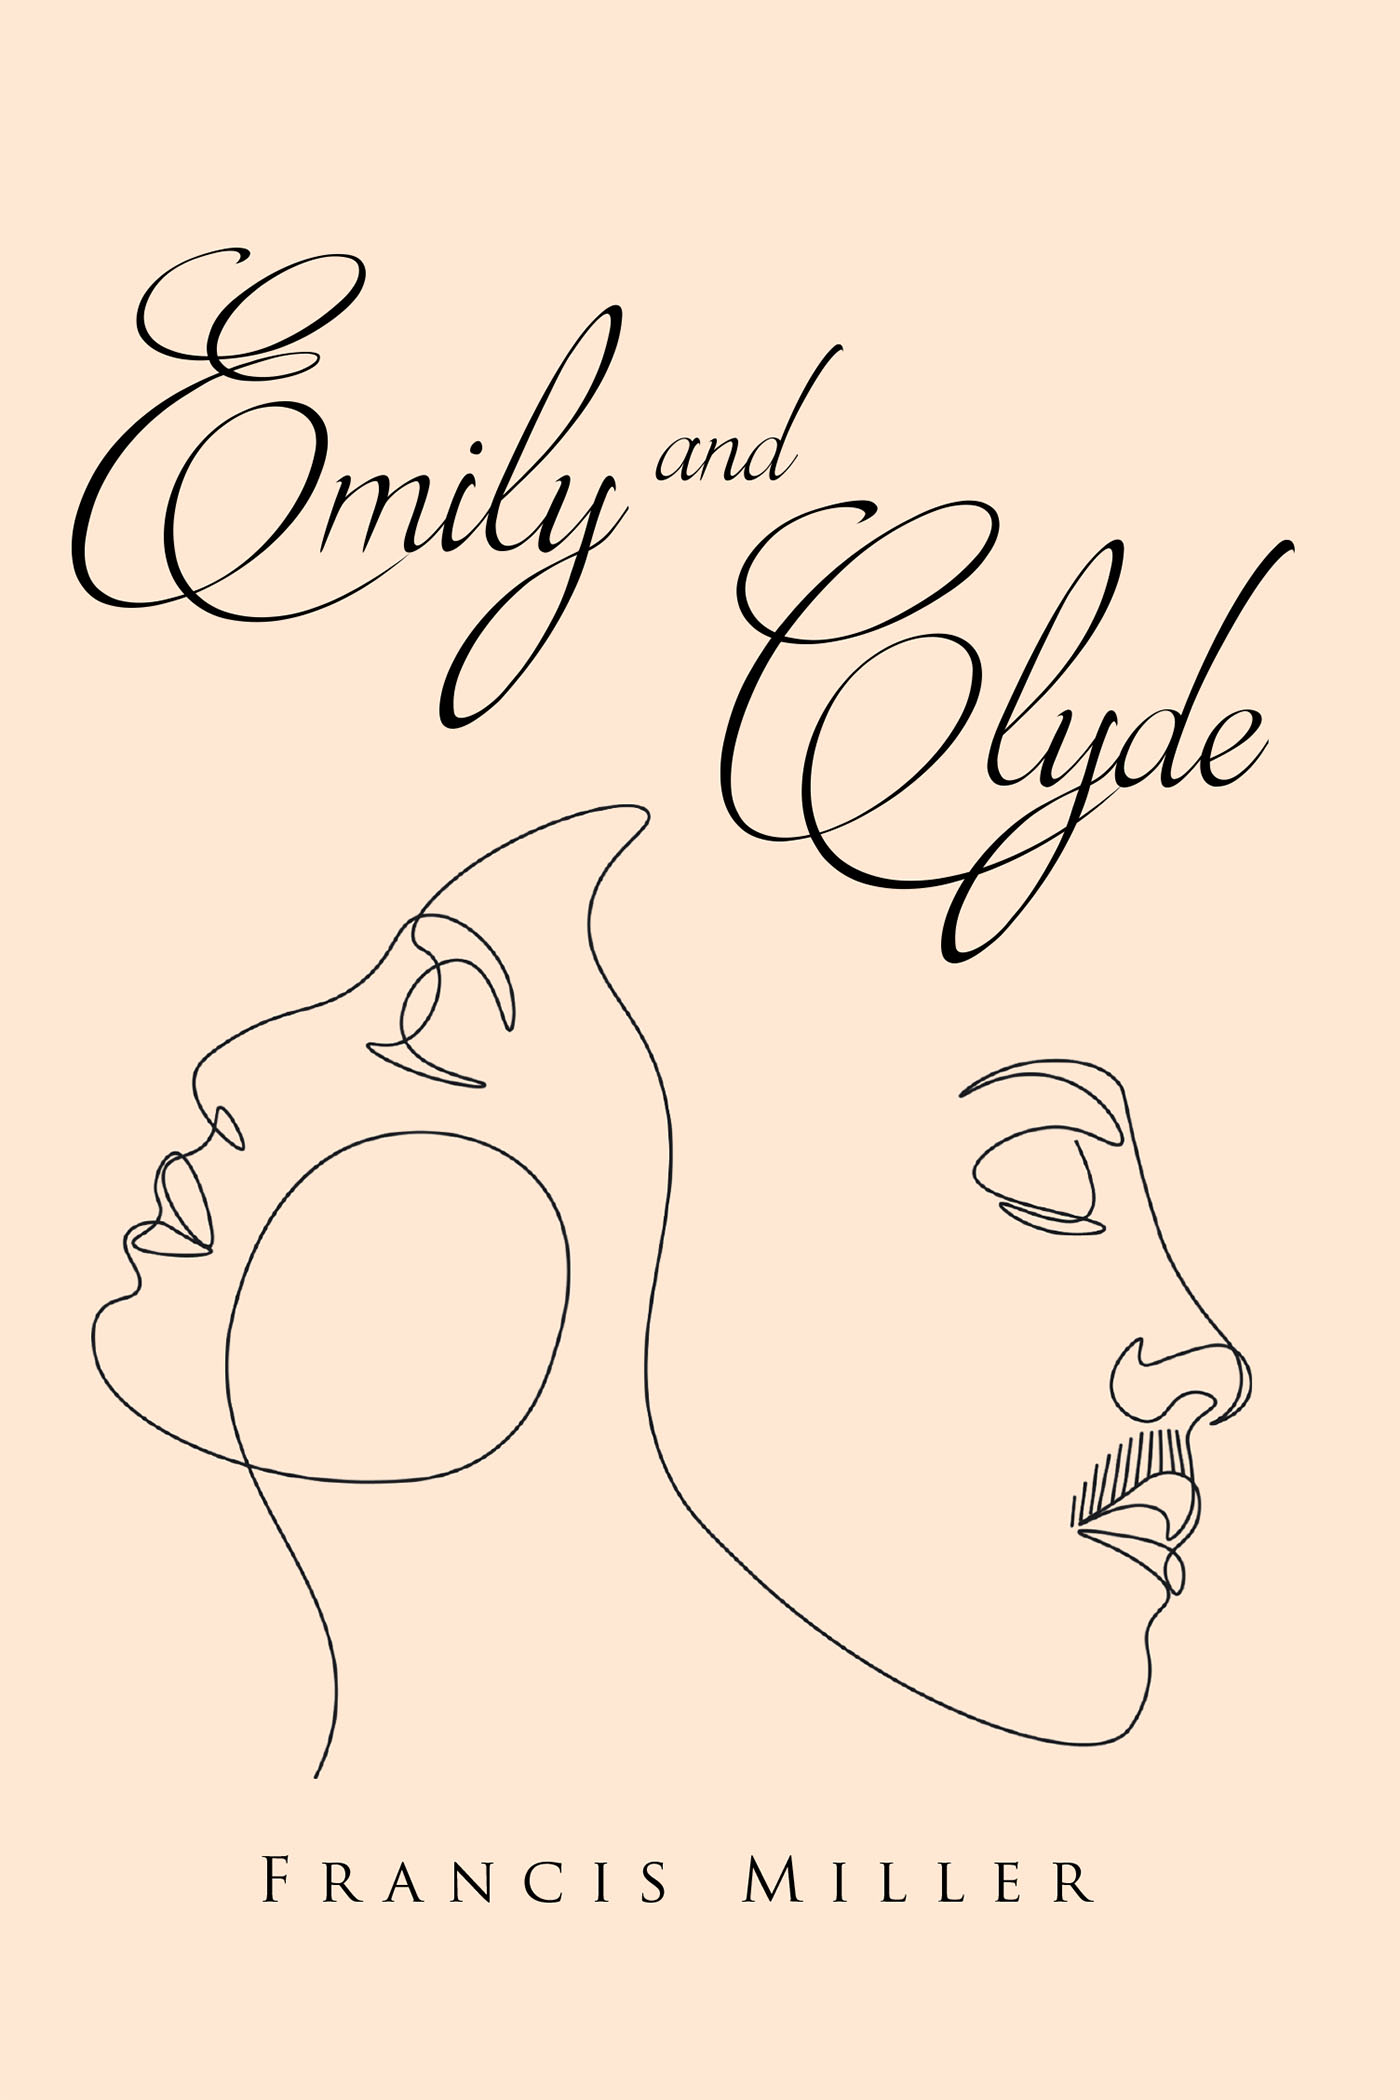 Author Francis Miller’s New Book, "Emily and Clyde," is a Compelling Tale That Centers Around the Investigation Into a Sixteen-Year-Old Murder Case